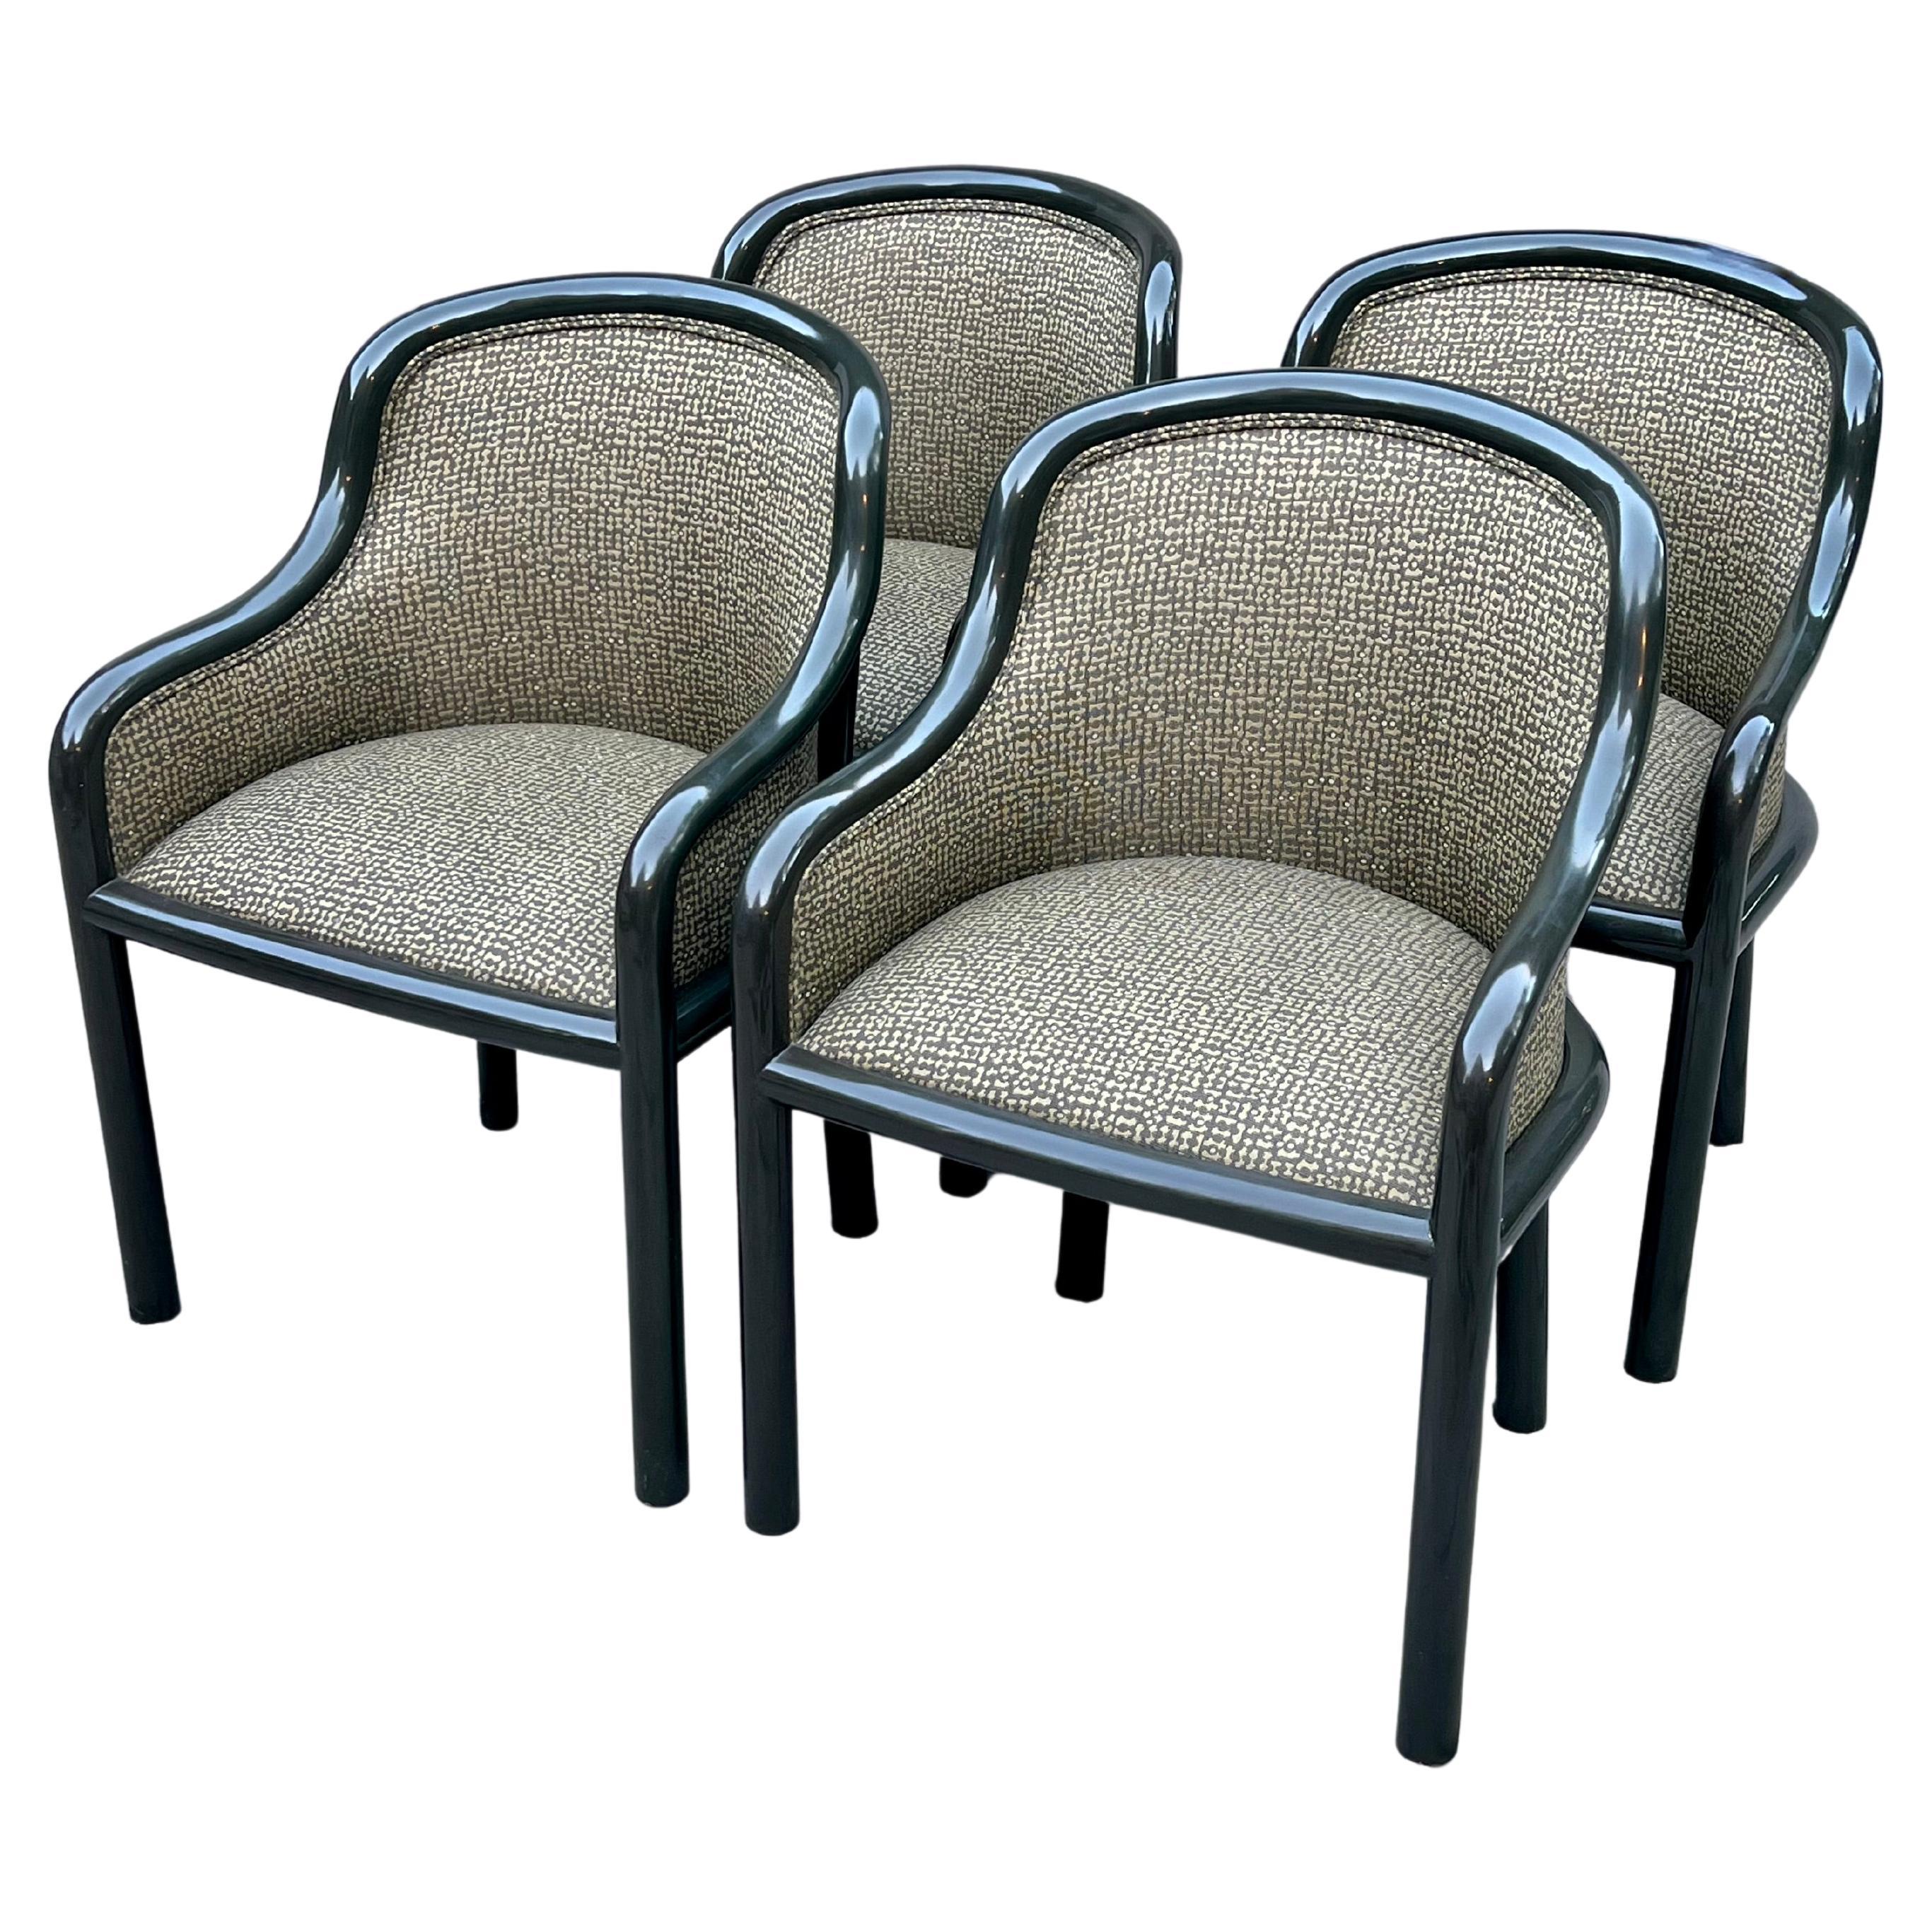 Four Lacquered Karl Springer Side or Dining Chairs